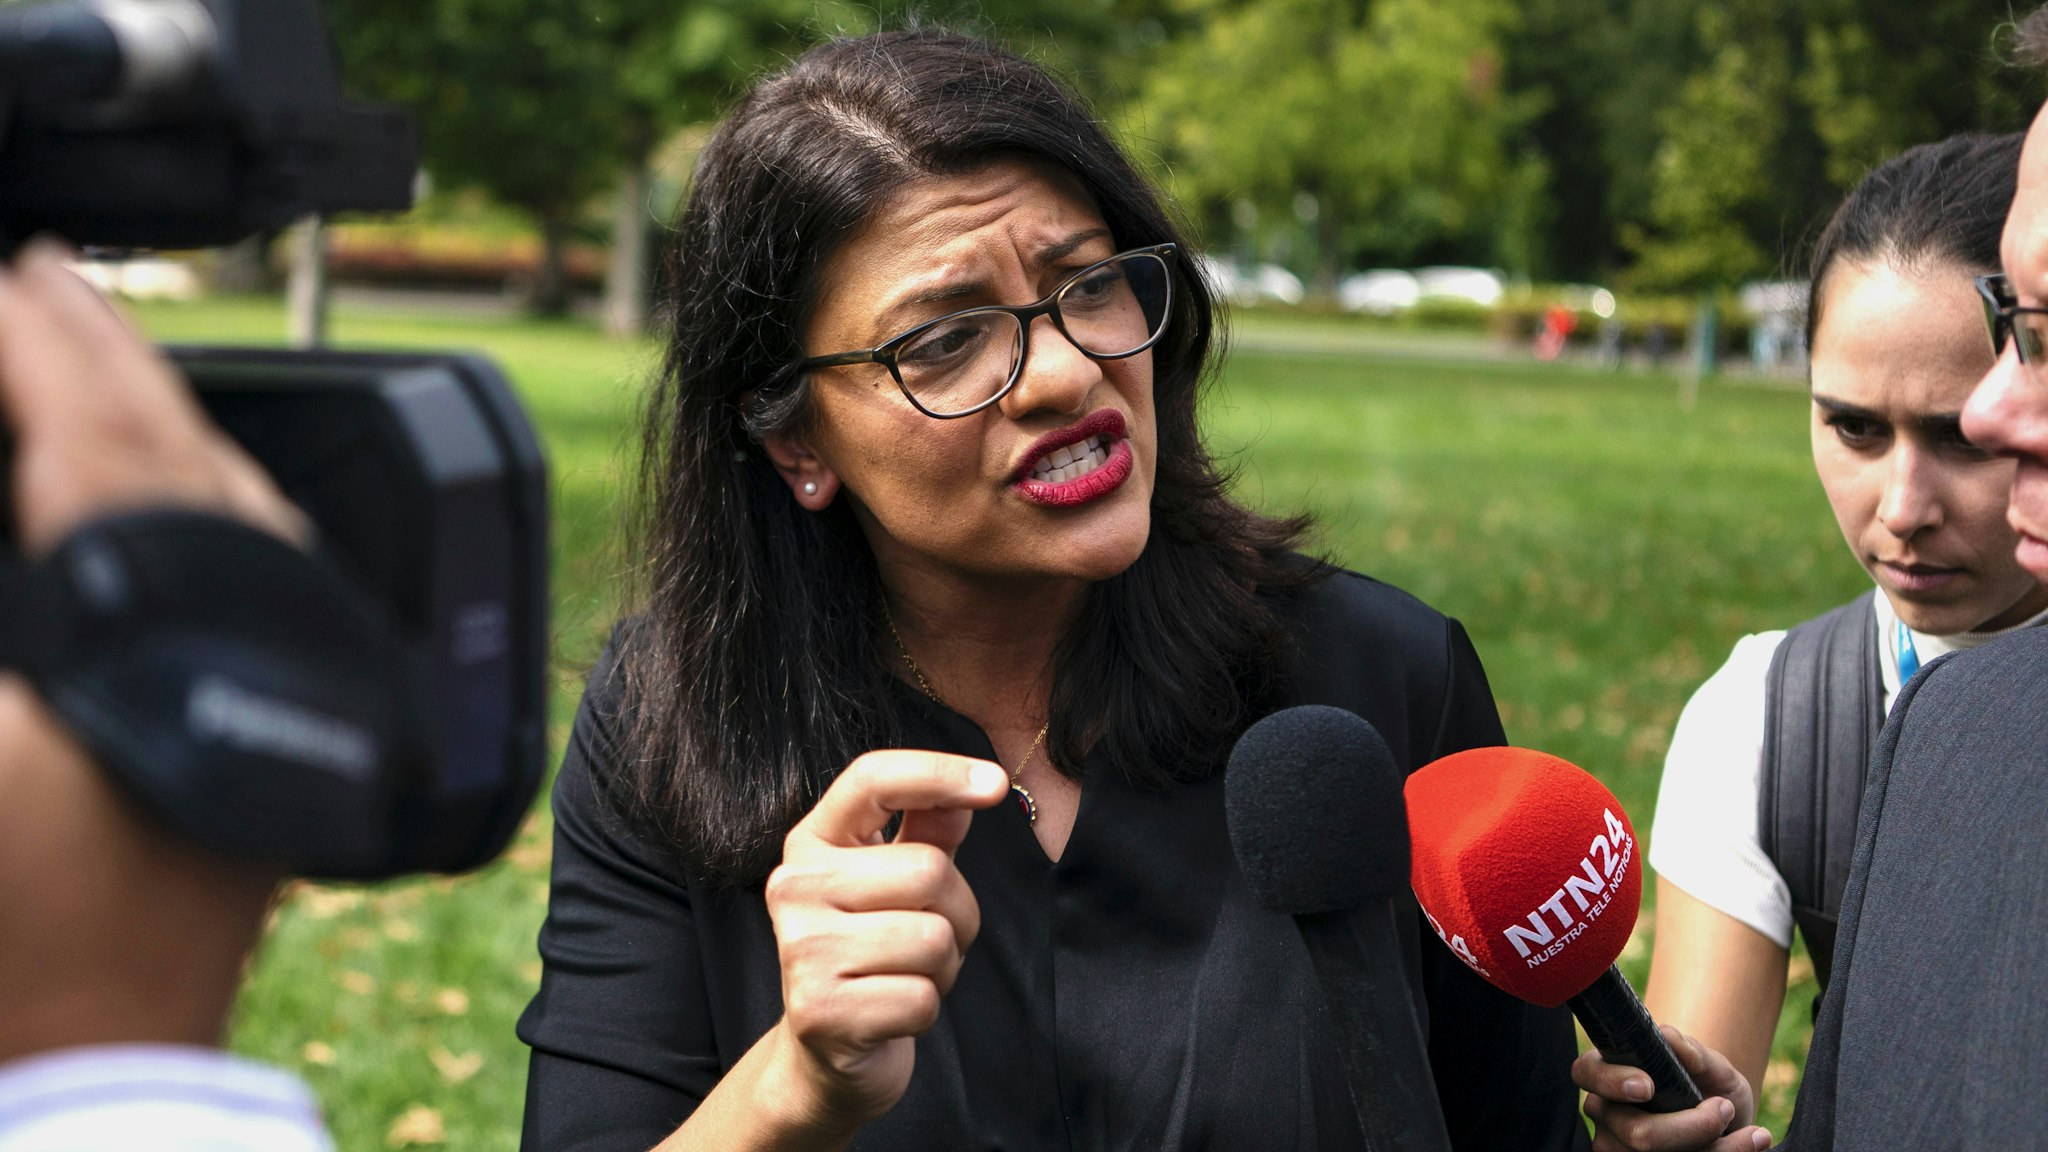 Representative Rashida Tlaib, a Democrat from Michigan, speaks with members of the media following a rally held in support of impeaching U.S. President Donald Trump in Washington, D.C., U.S., on Thursday, Sept. 26, 2019. House Speaker Nancy Pelosi announced that the House would begin an impeachment inquiry against Trump related to a whistle-blower complaint alleging troubling interactions between Trump and the president of Ukraine.